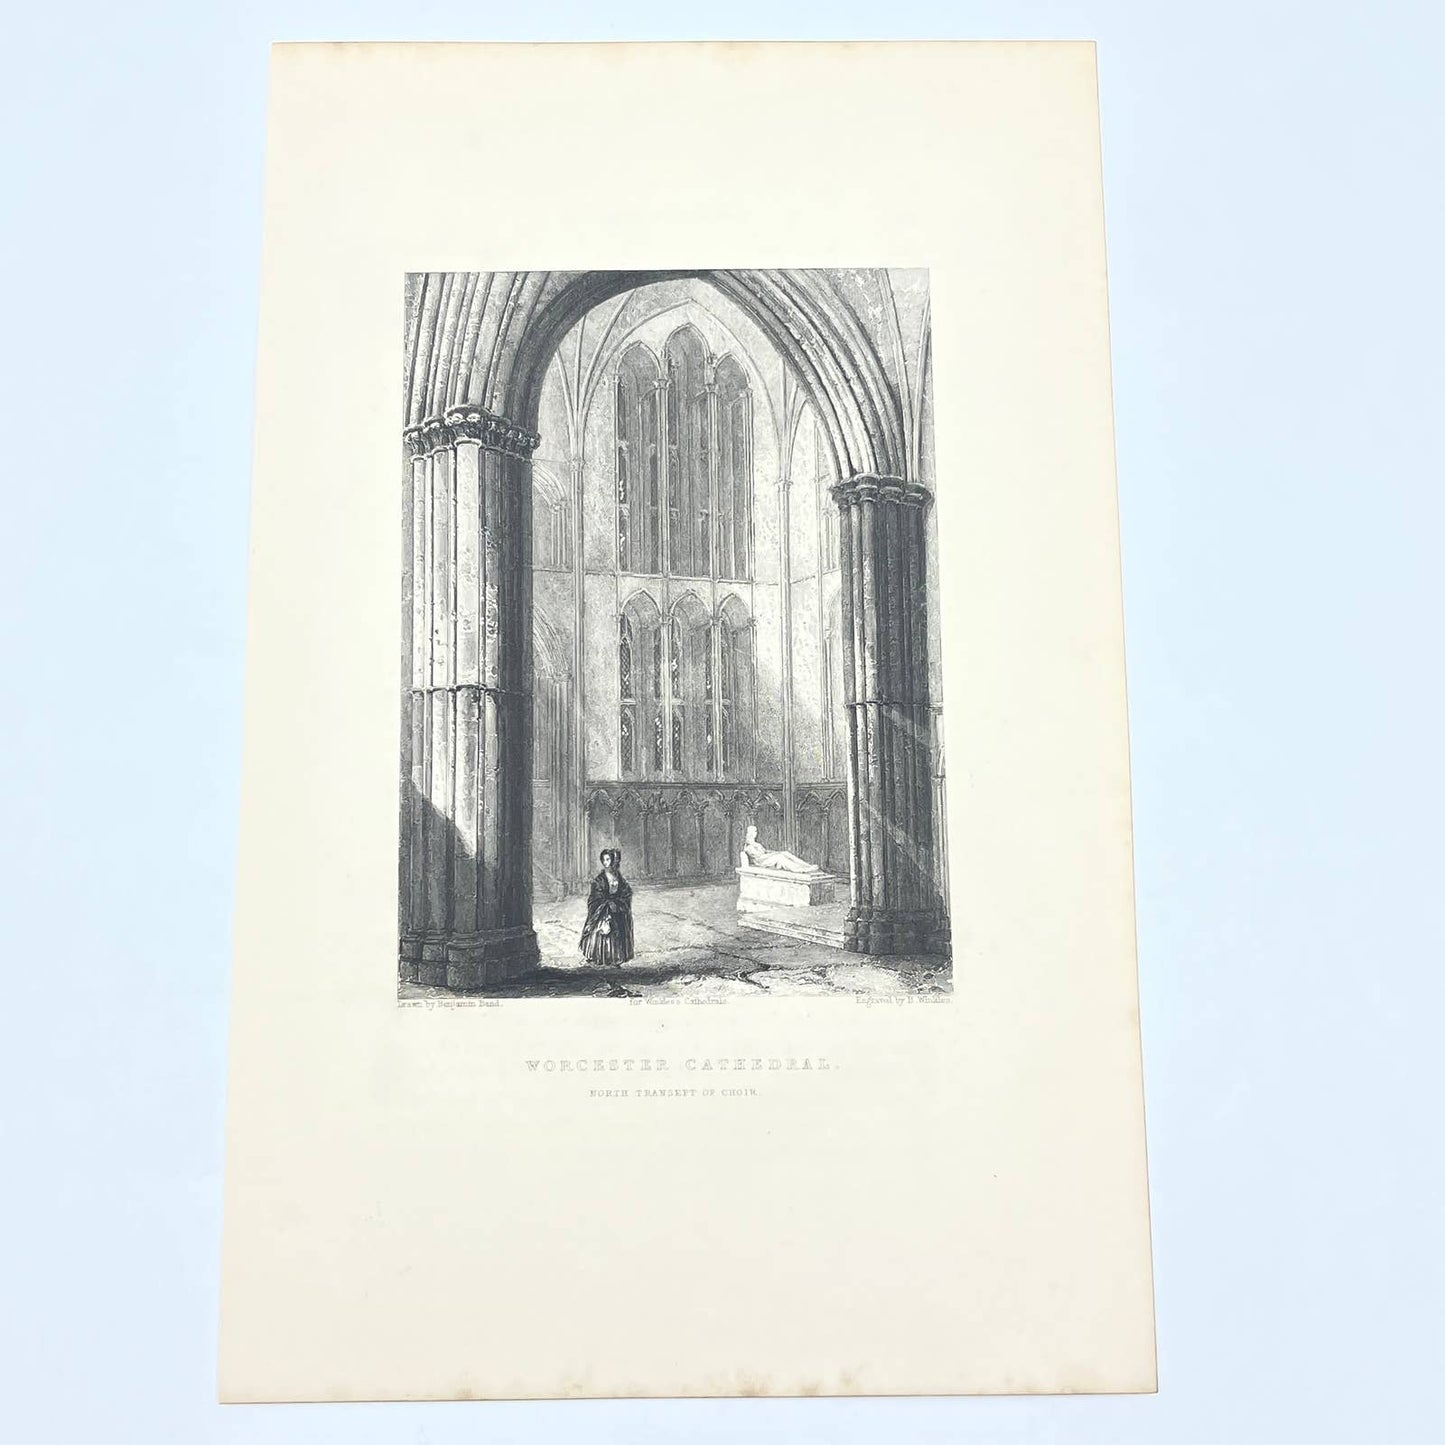 1842 Original Art Engraving Worcester Cathedral - North Transept of Choir AC6